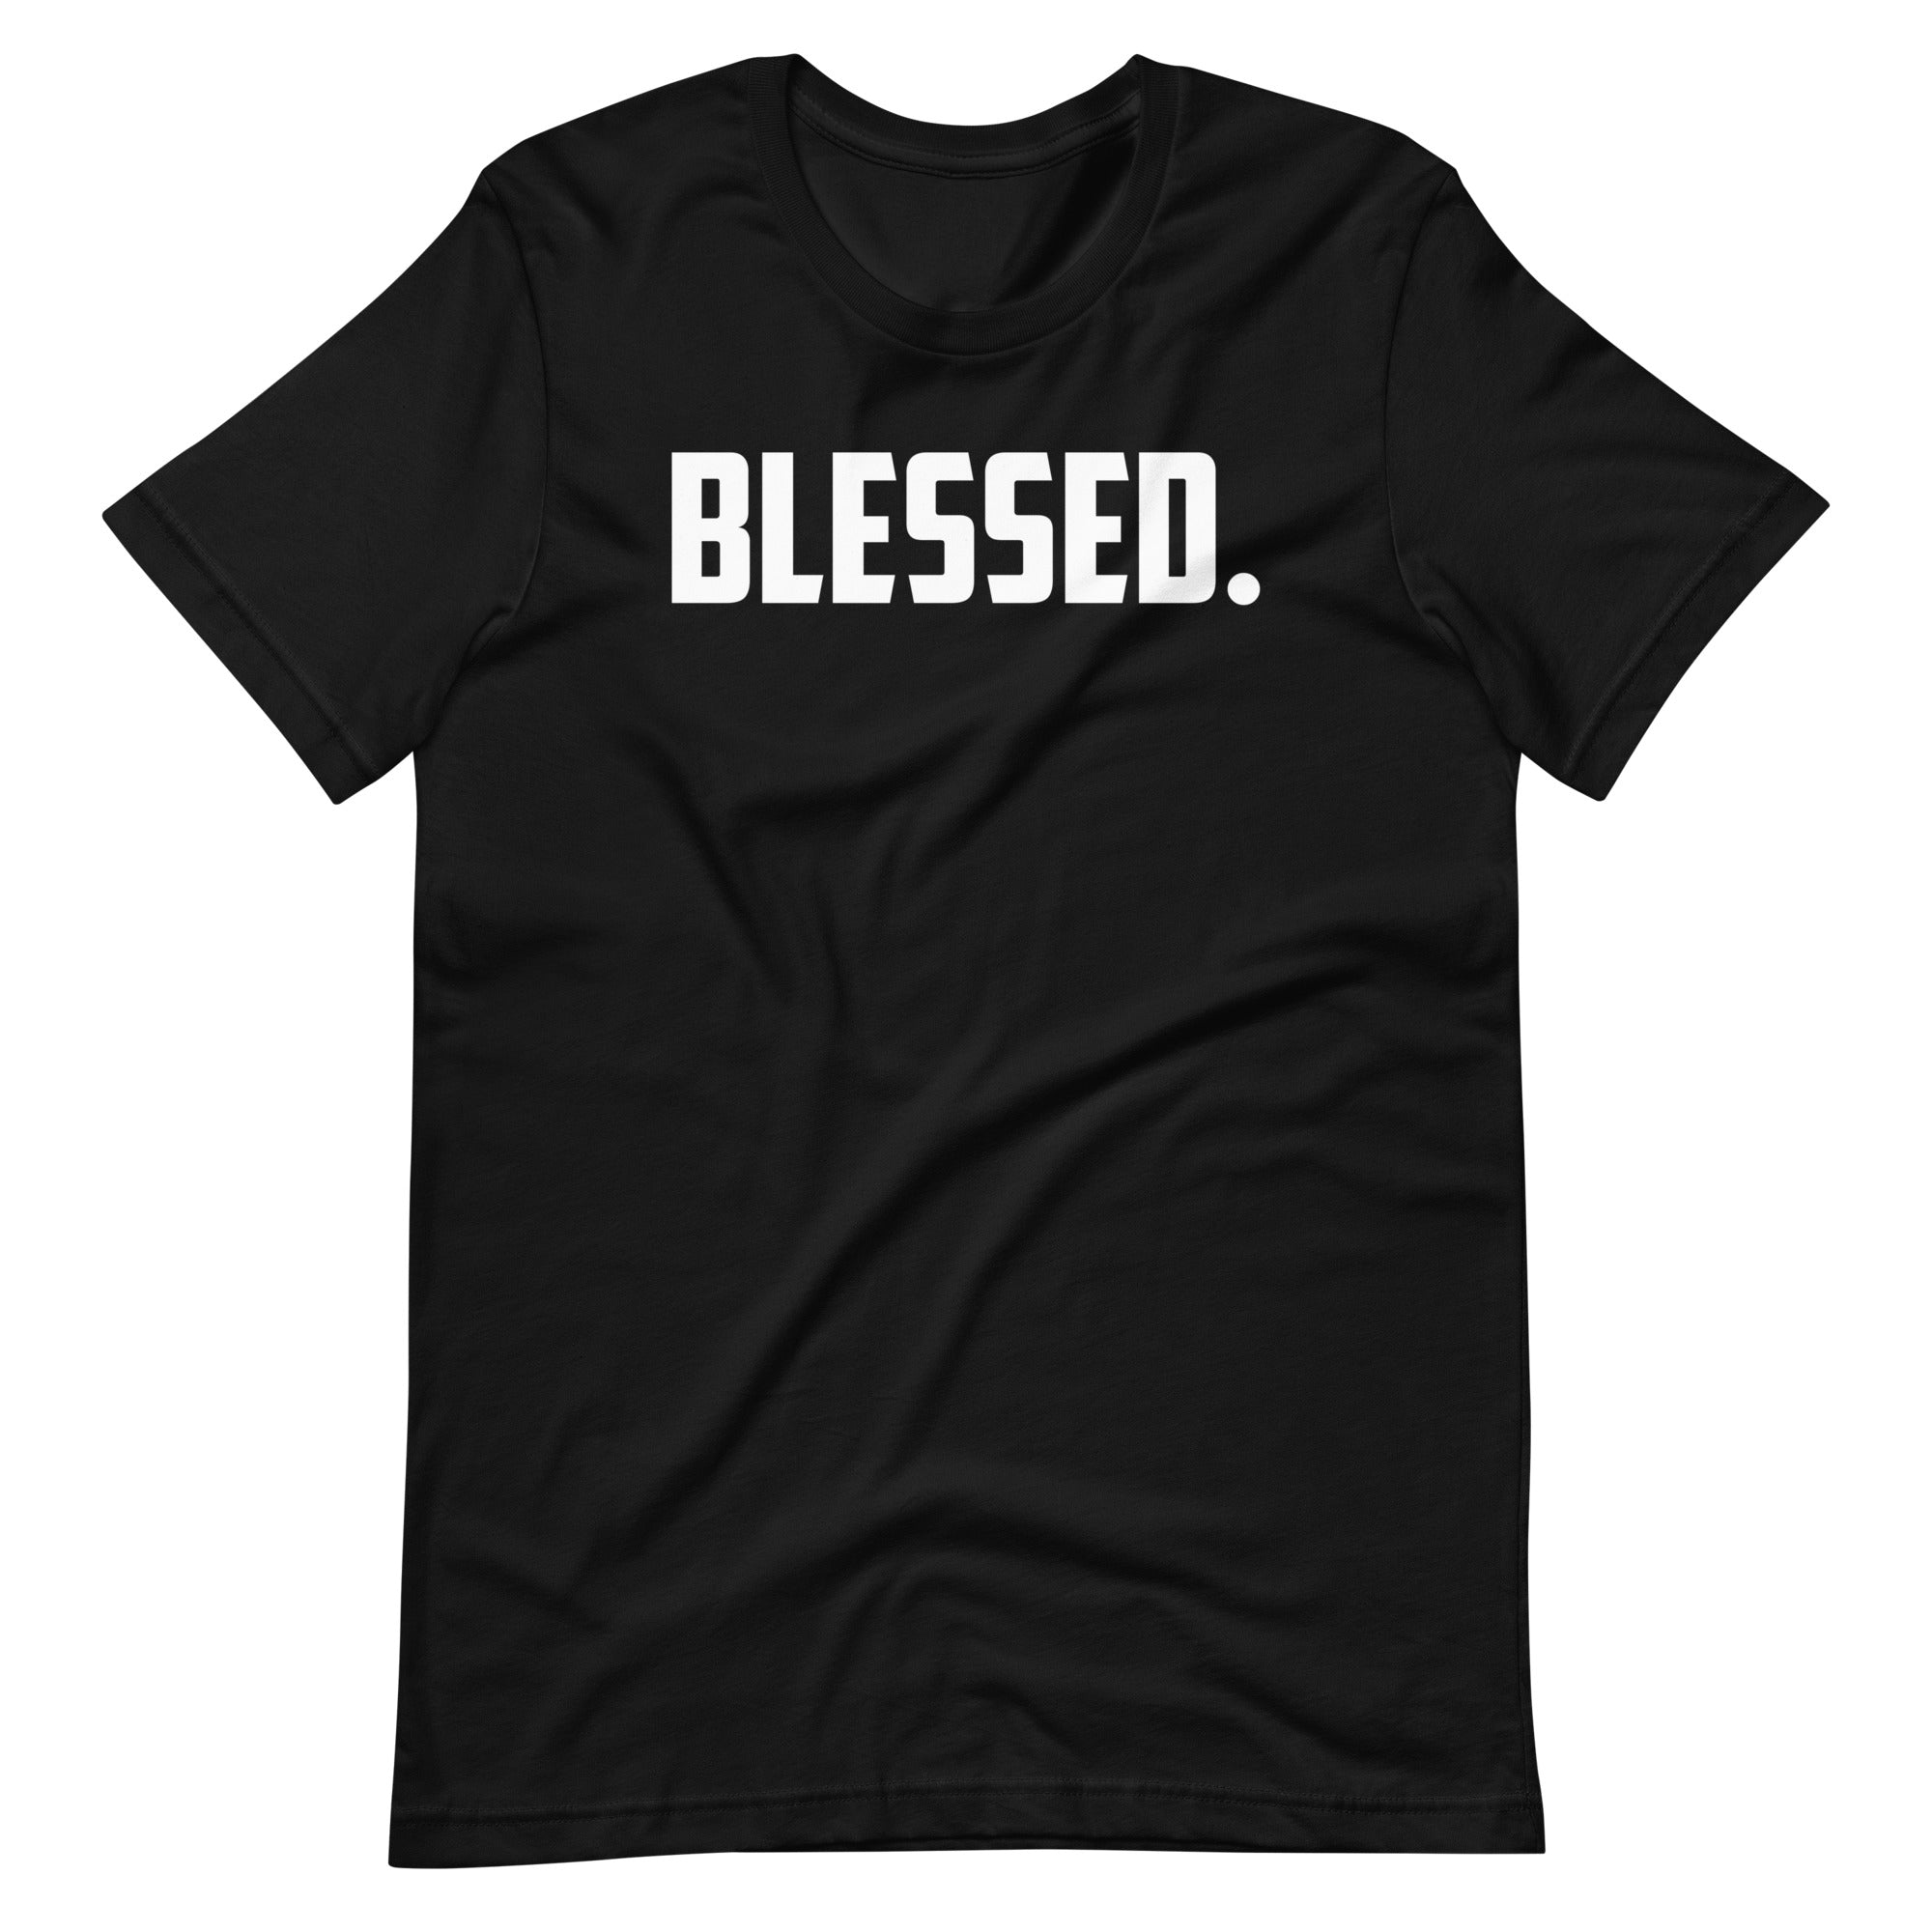 Mike Sorrentino Blessed Shirt